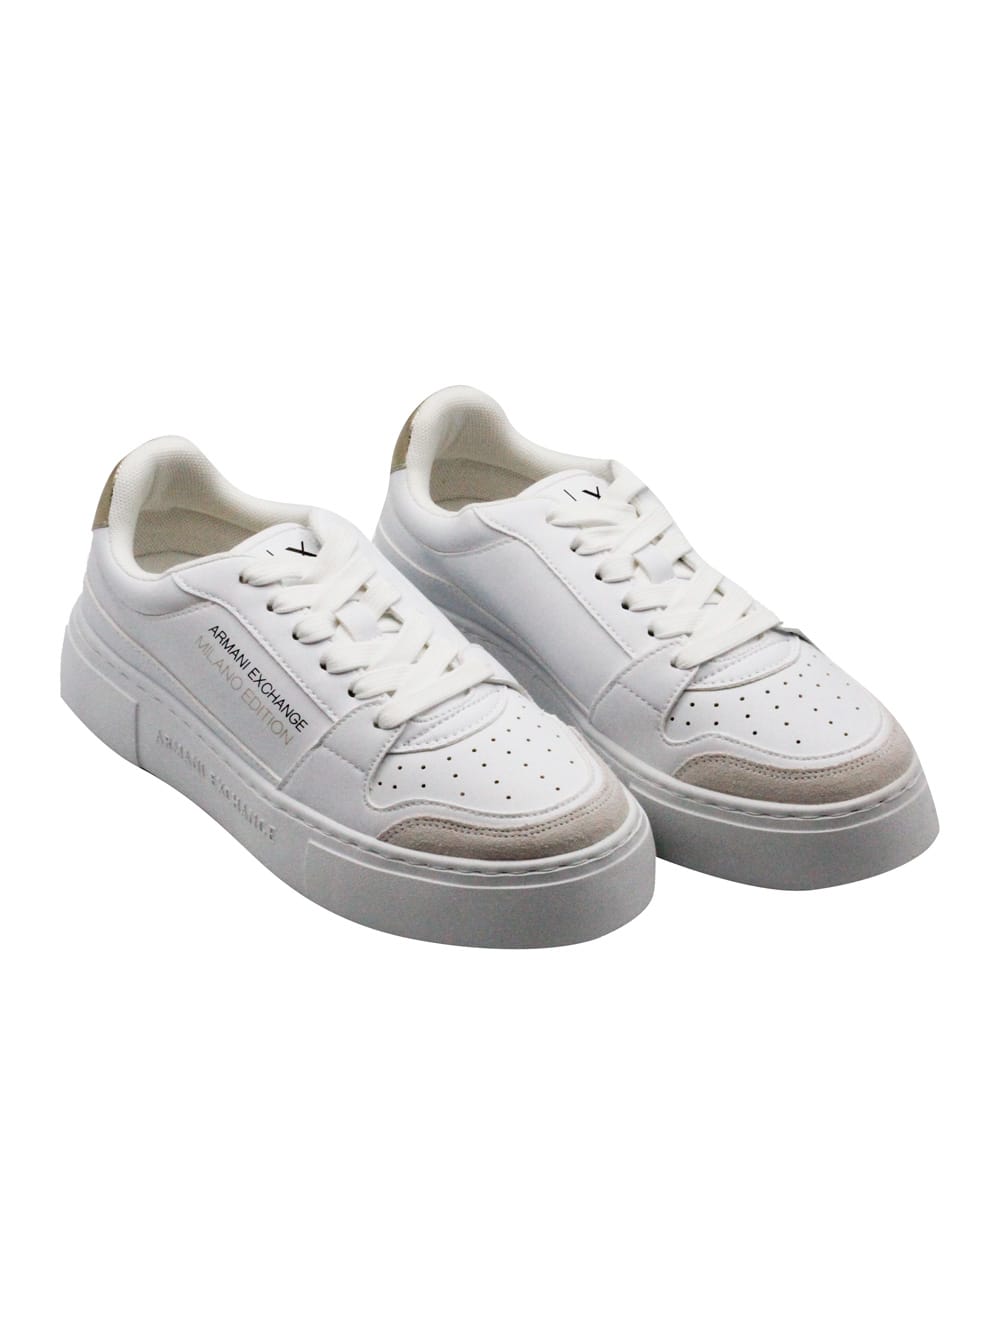 Shop Armani Collezioni Leather Sneakers With Matching Box Sole And Lace Closure. Small Golden Rear Logo And Side Writing In White